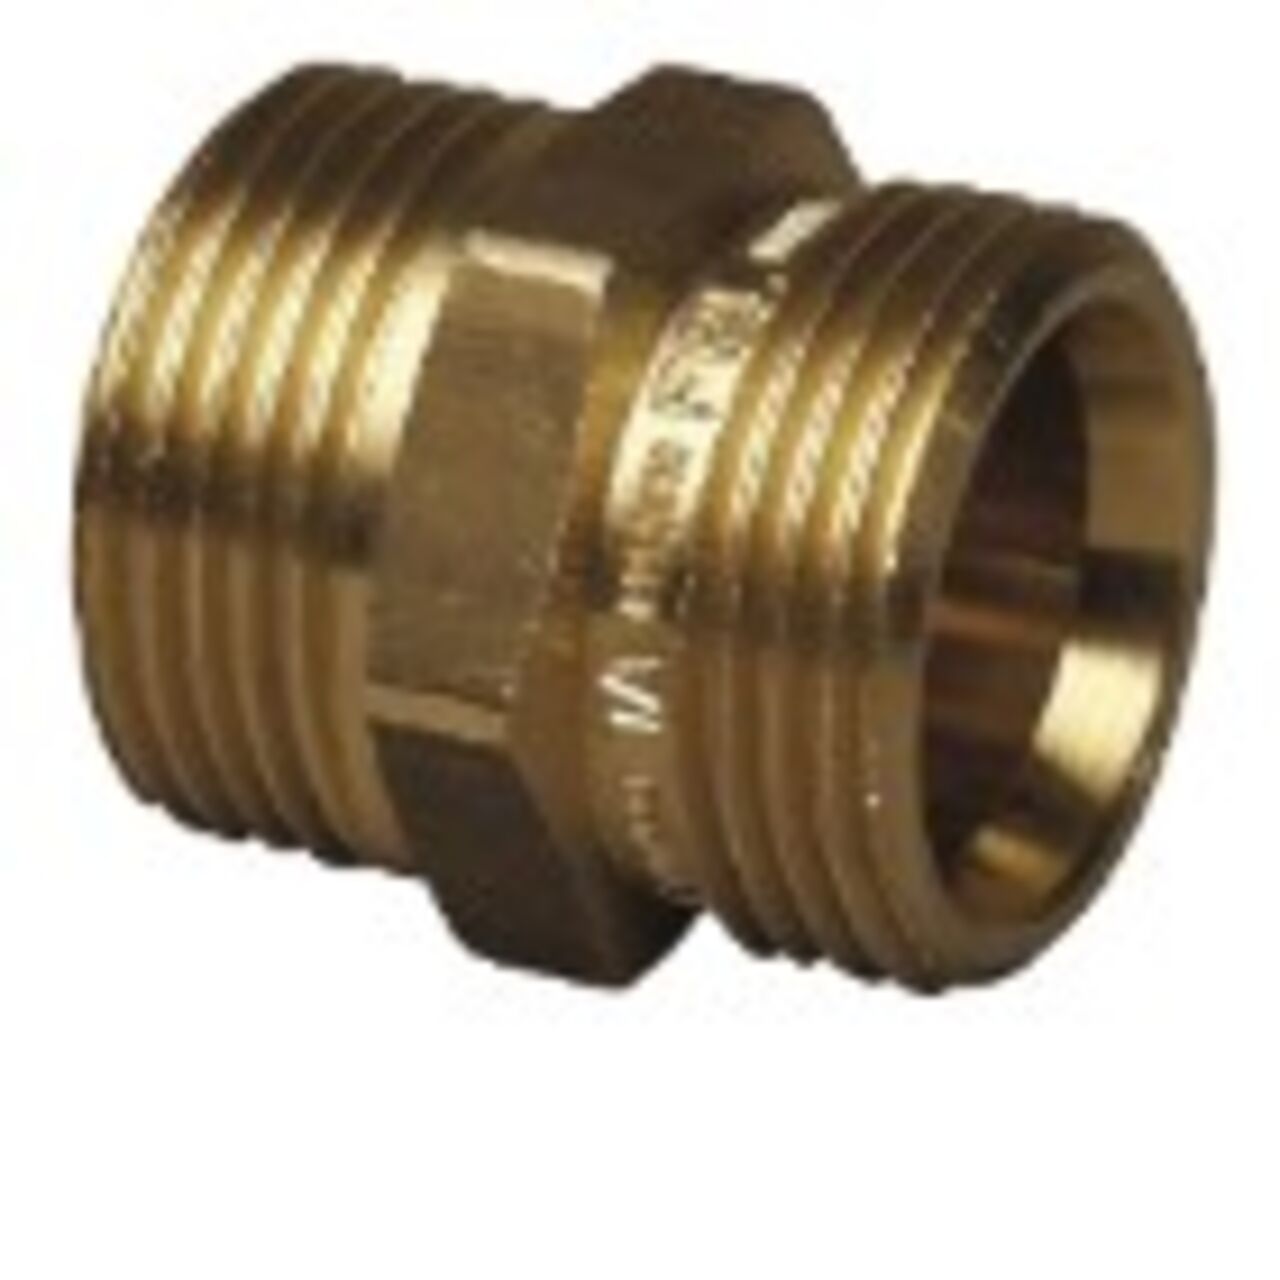 Uponor Dobbelnippel R1" x M34 1